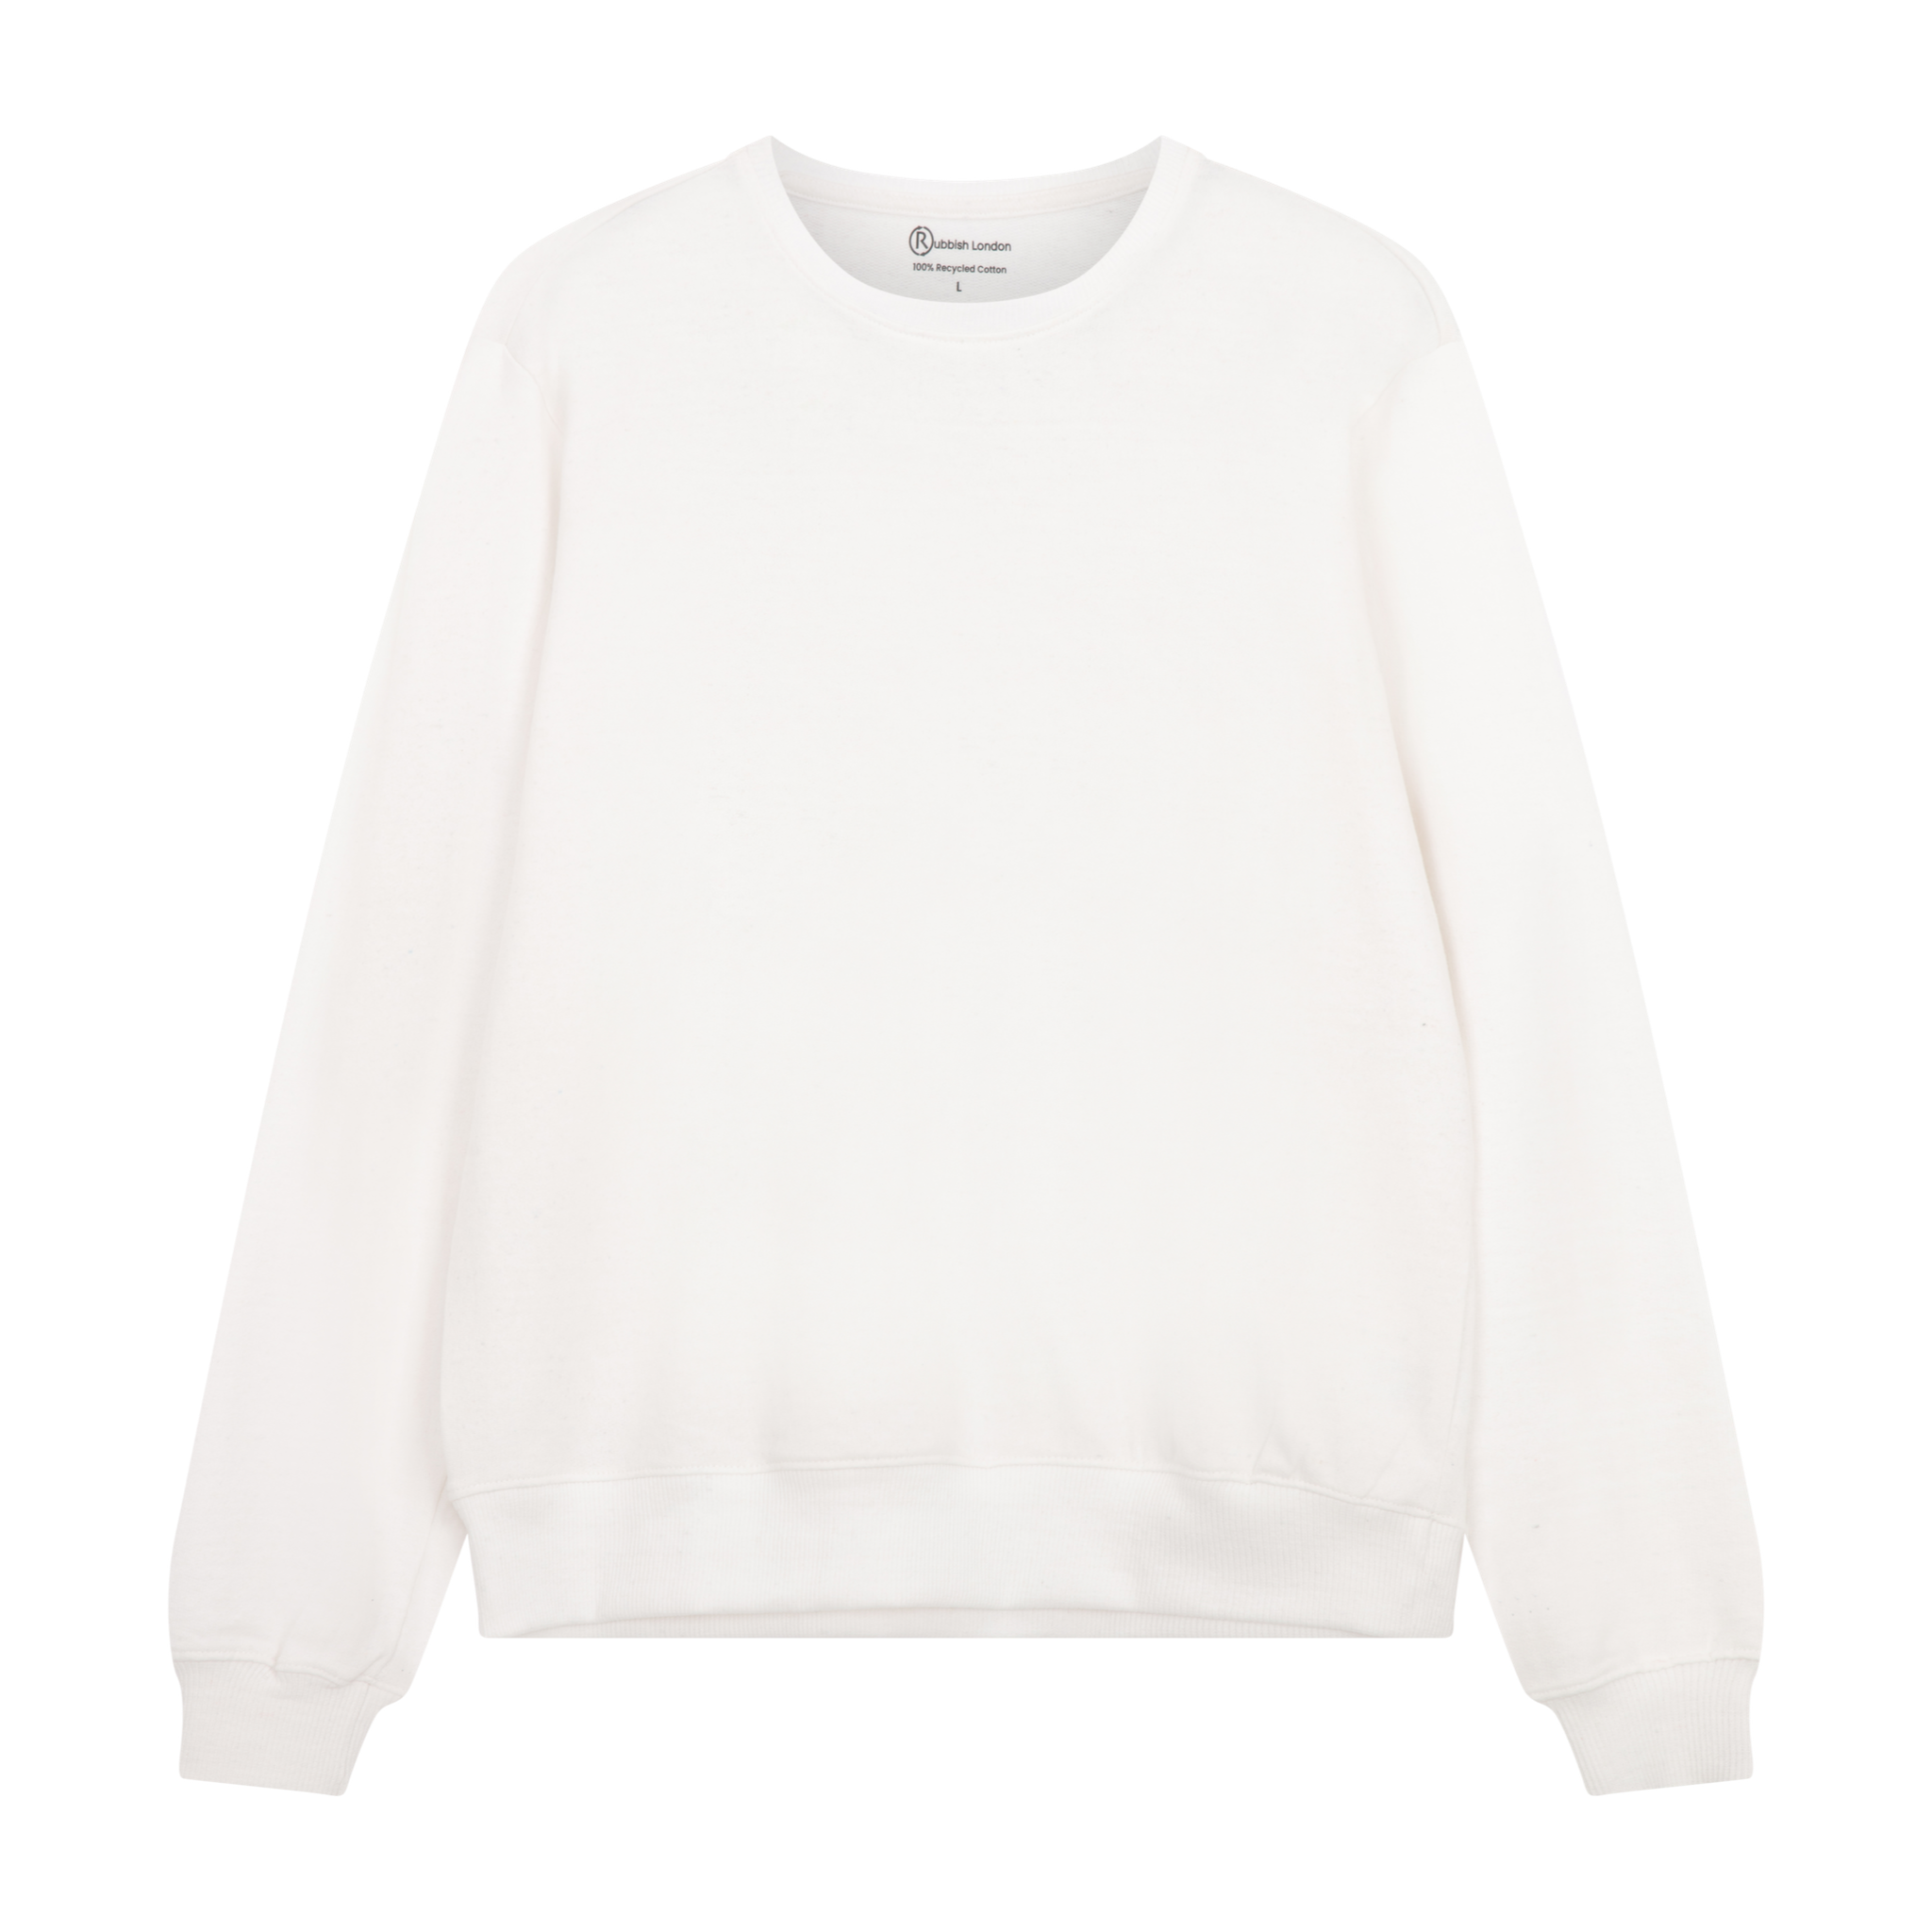 100% Recycled Cotton Lightweight Fitted Sweatshirt